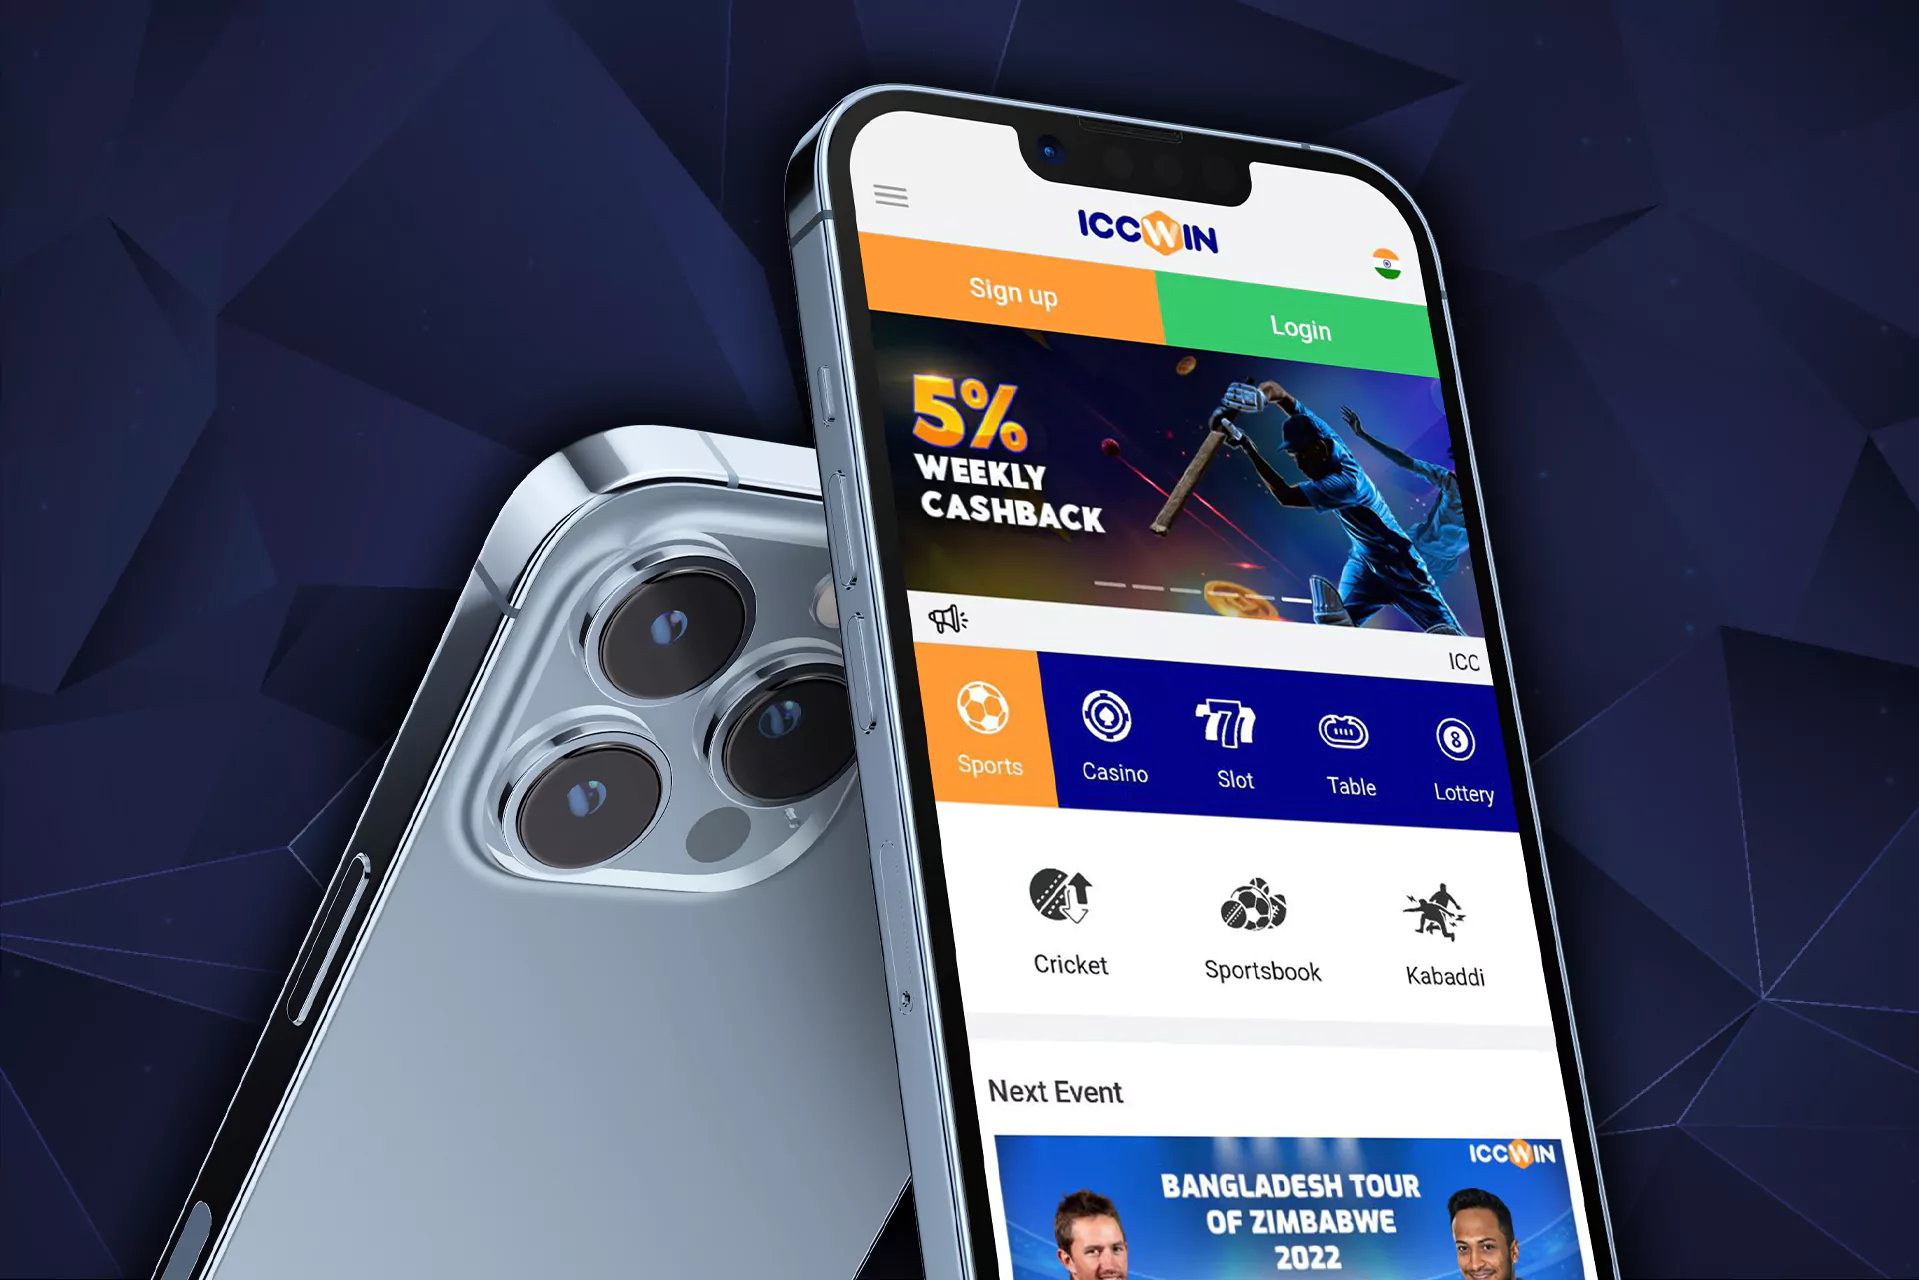 ICCWIN has a useful and comfortable mobile app for betting.